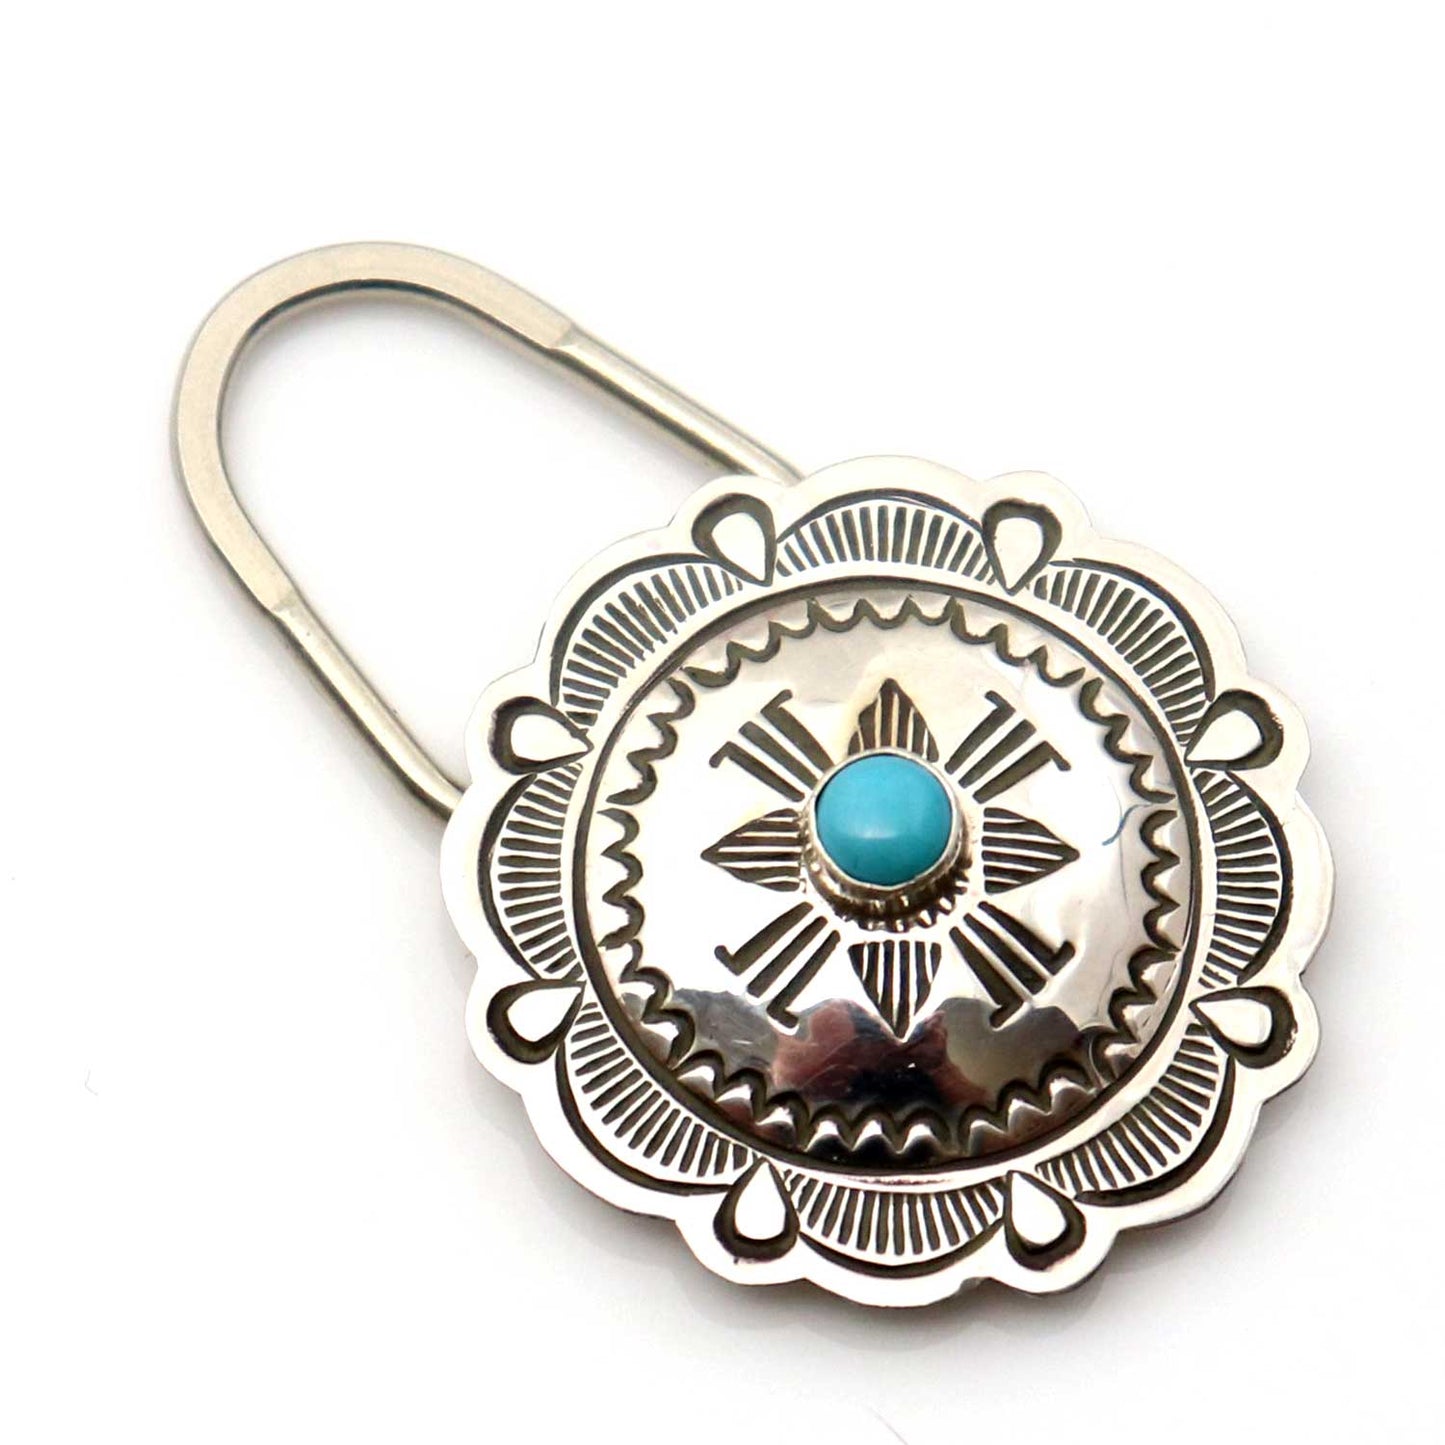 Silver & Turquoise Key Ring By Blackgoat